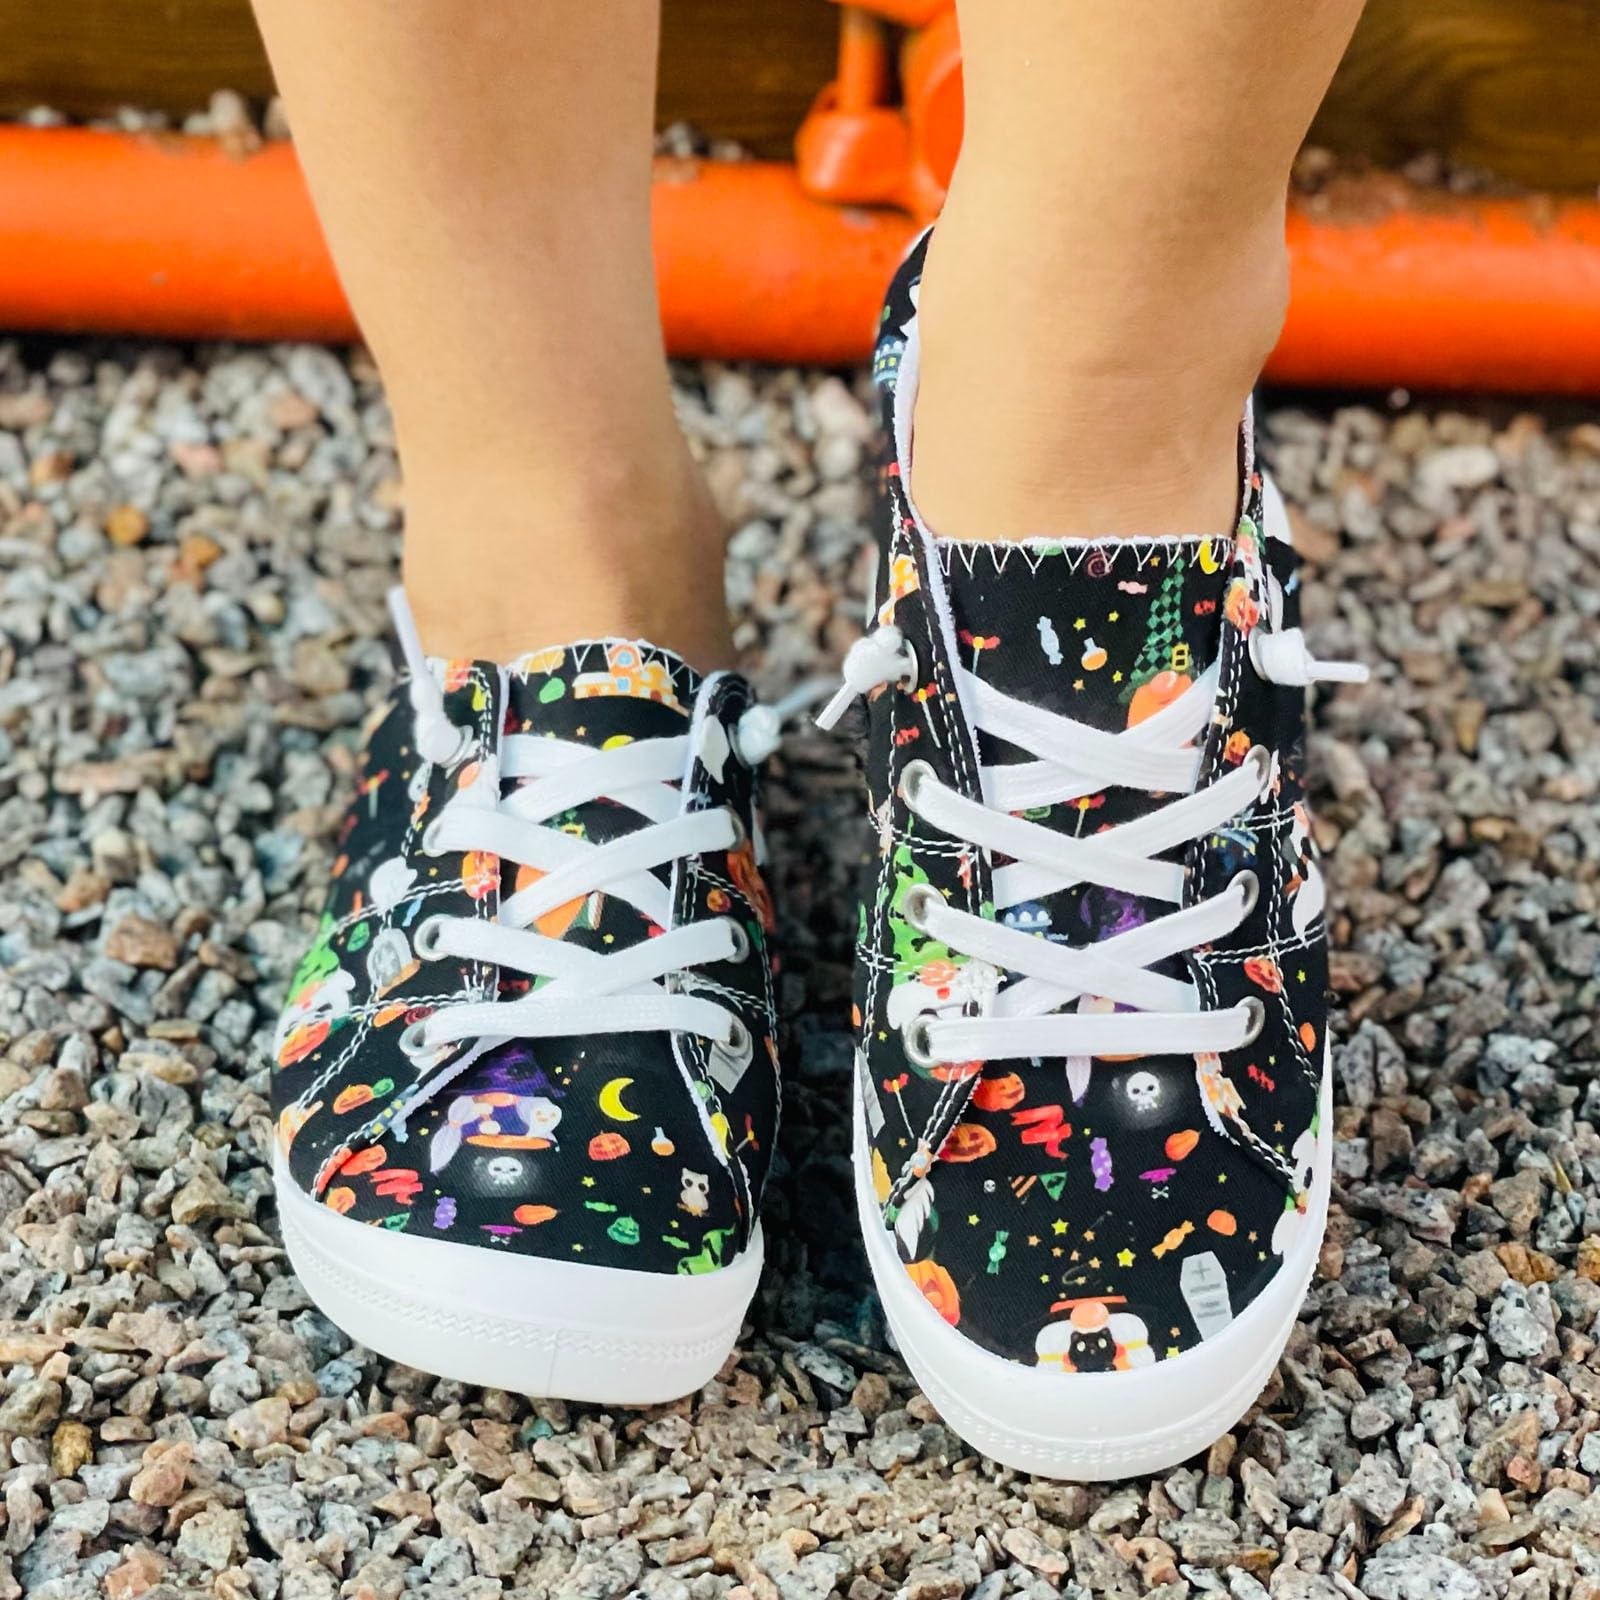 Halloween Shoes for Women Halloween Sneakers Pumpkin Shoes for Women Skeleton Shoes Casual Fashion Skull Head Print Lace Up Low Top Loafers Comfortable Walking Shoes